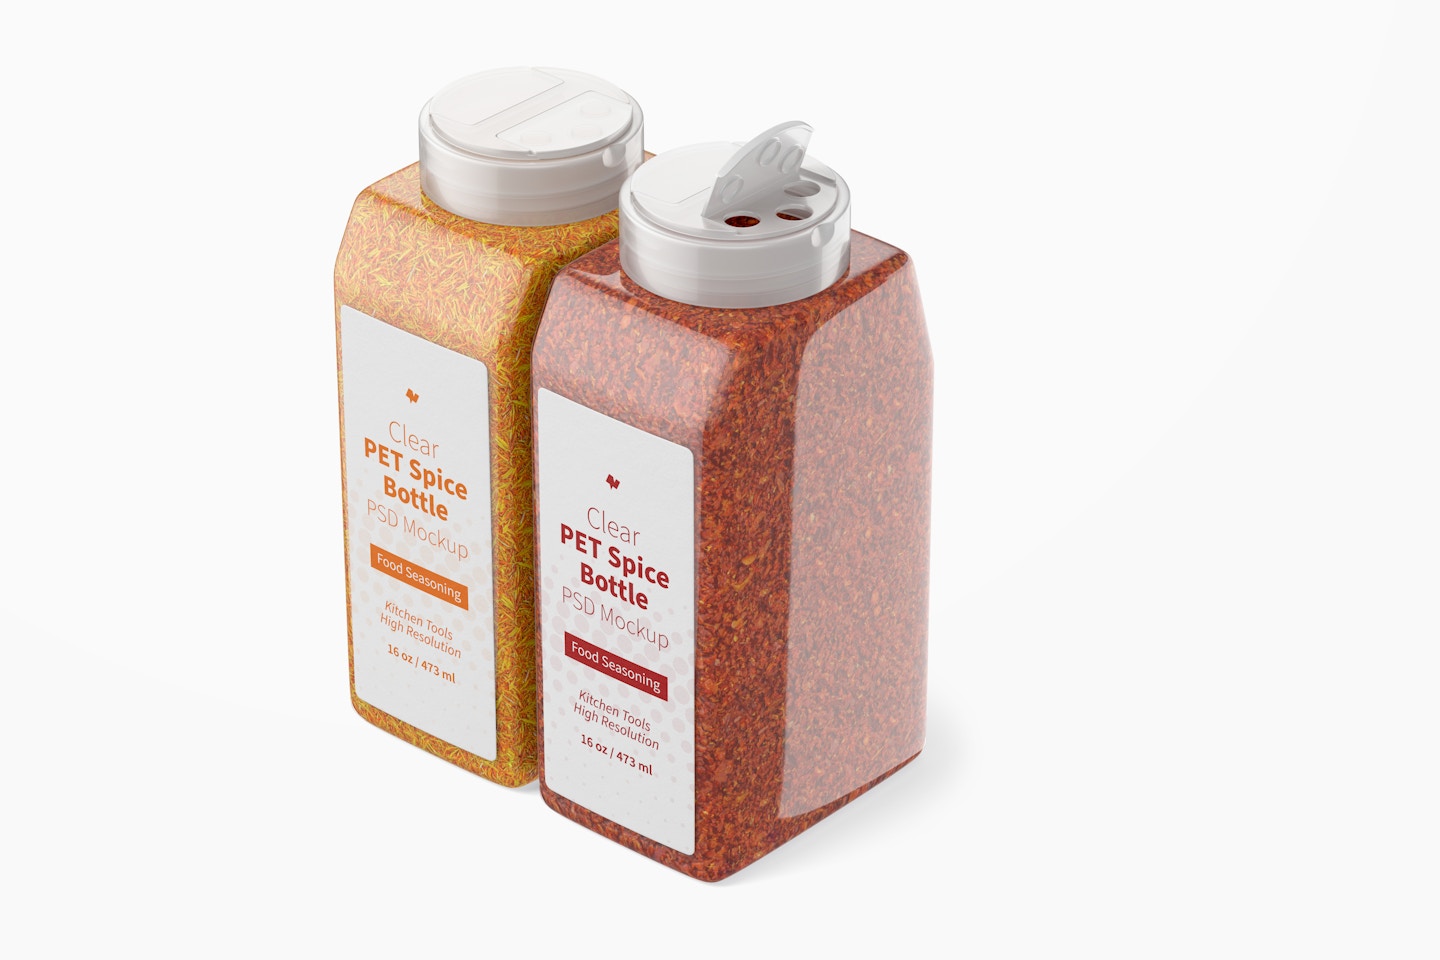 16 oz Clear PET Spice Bottles Mockup, Closed and Opened